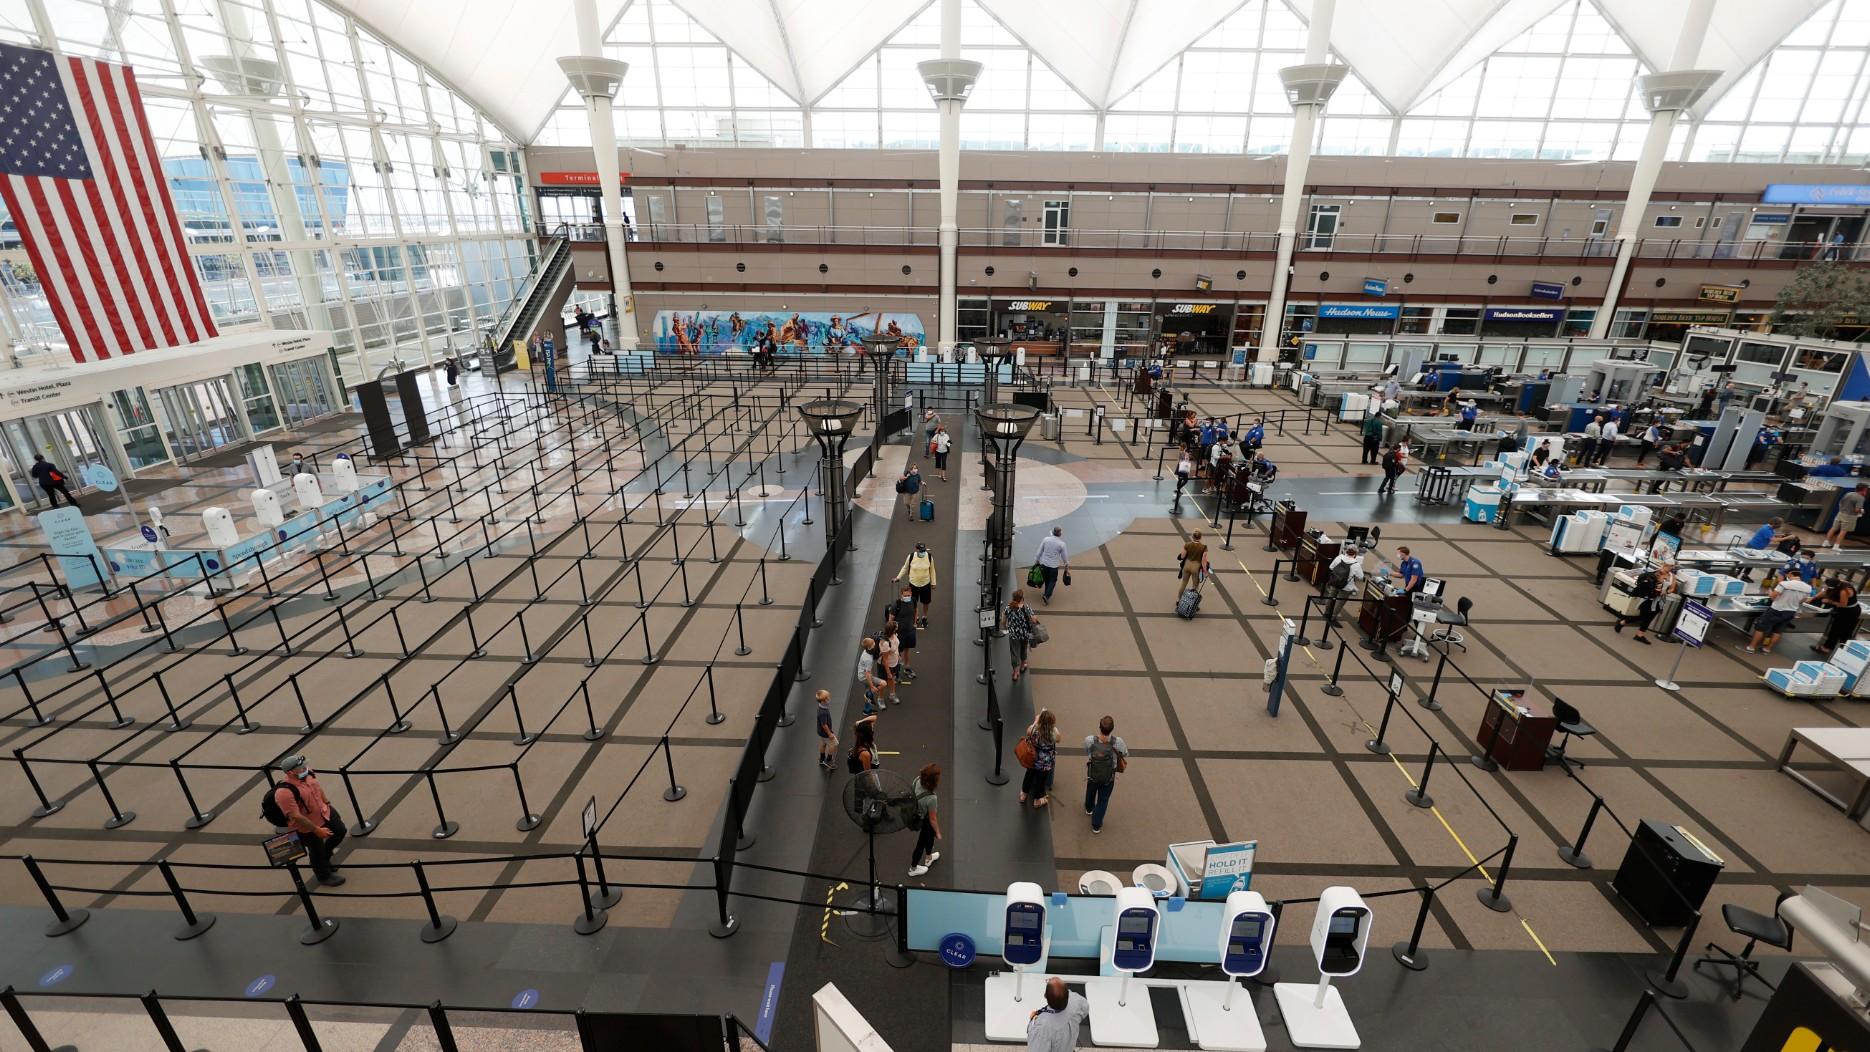 Travelers make their ways to the south security checkpoint in the main terminal of Denver International Airport Wednesday, July 22, 2020, in Denver. (AP Photo / David Zalubowski, File)